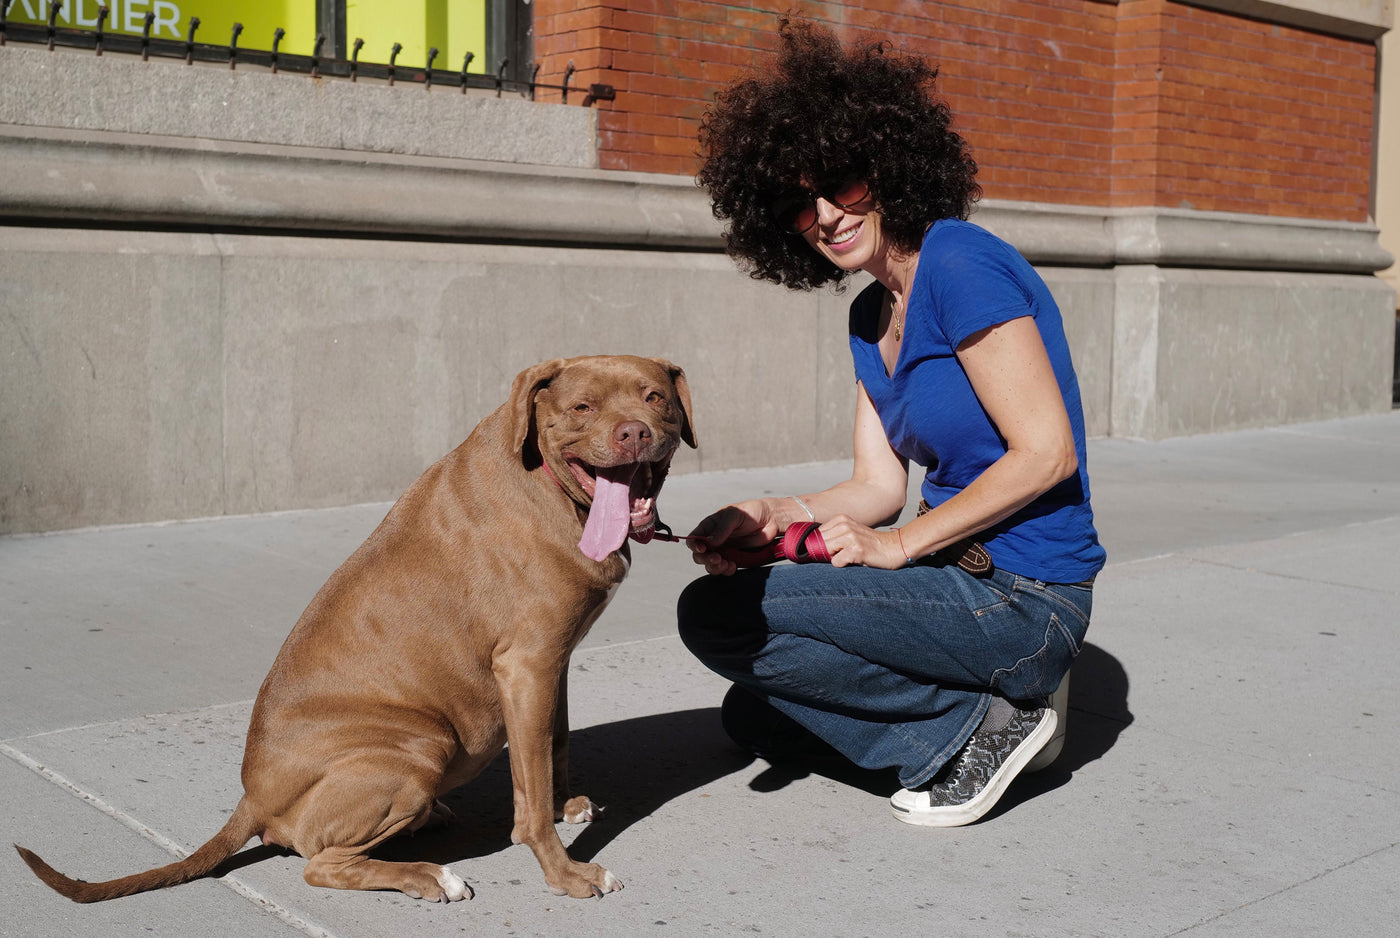 Pitbull mix rescue dog sitting on the street in NYC with young woman